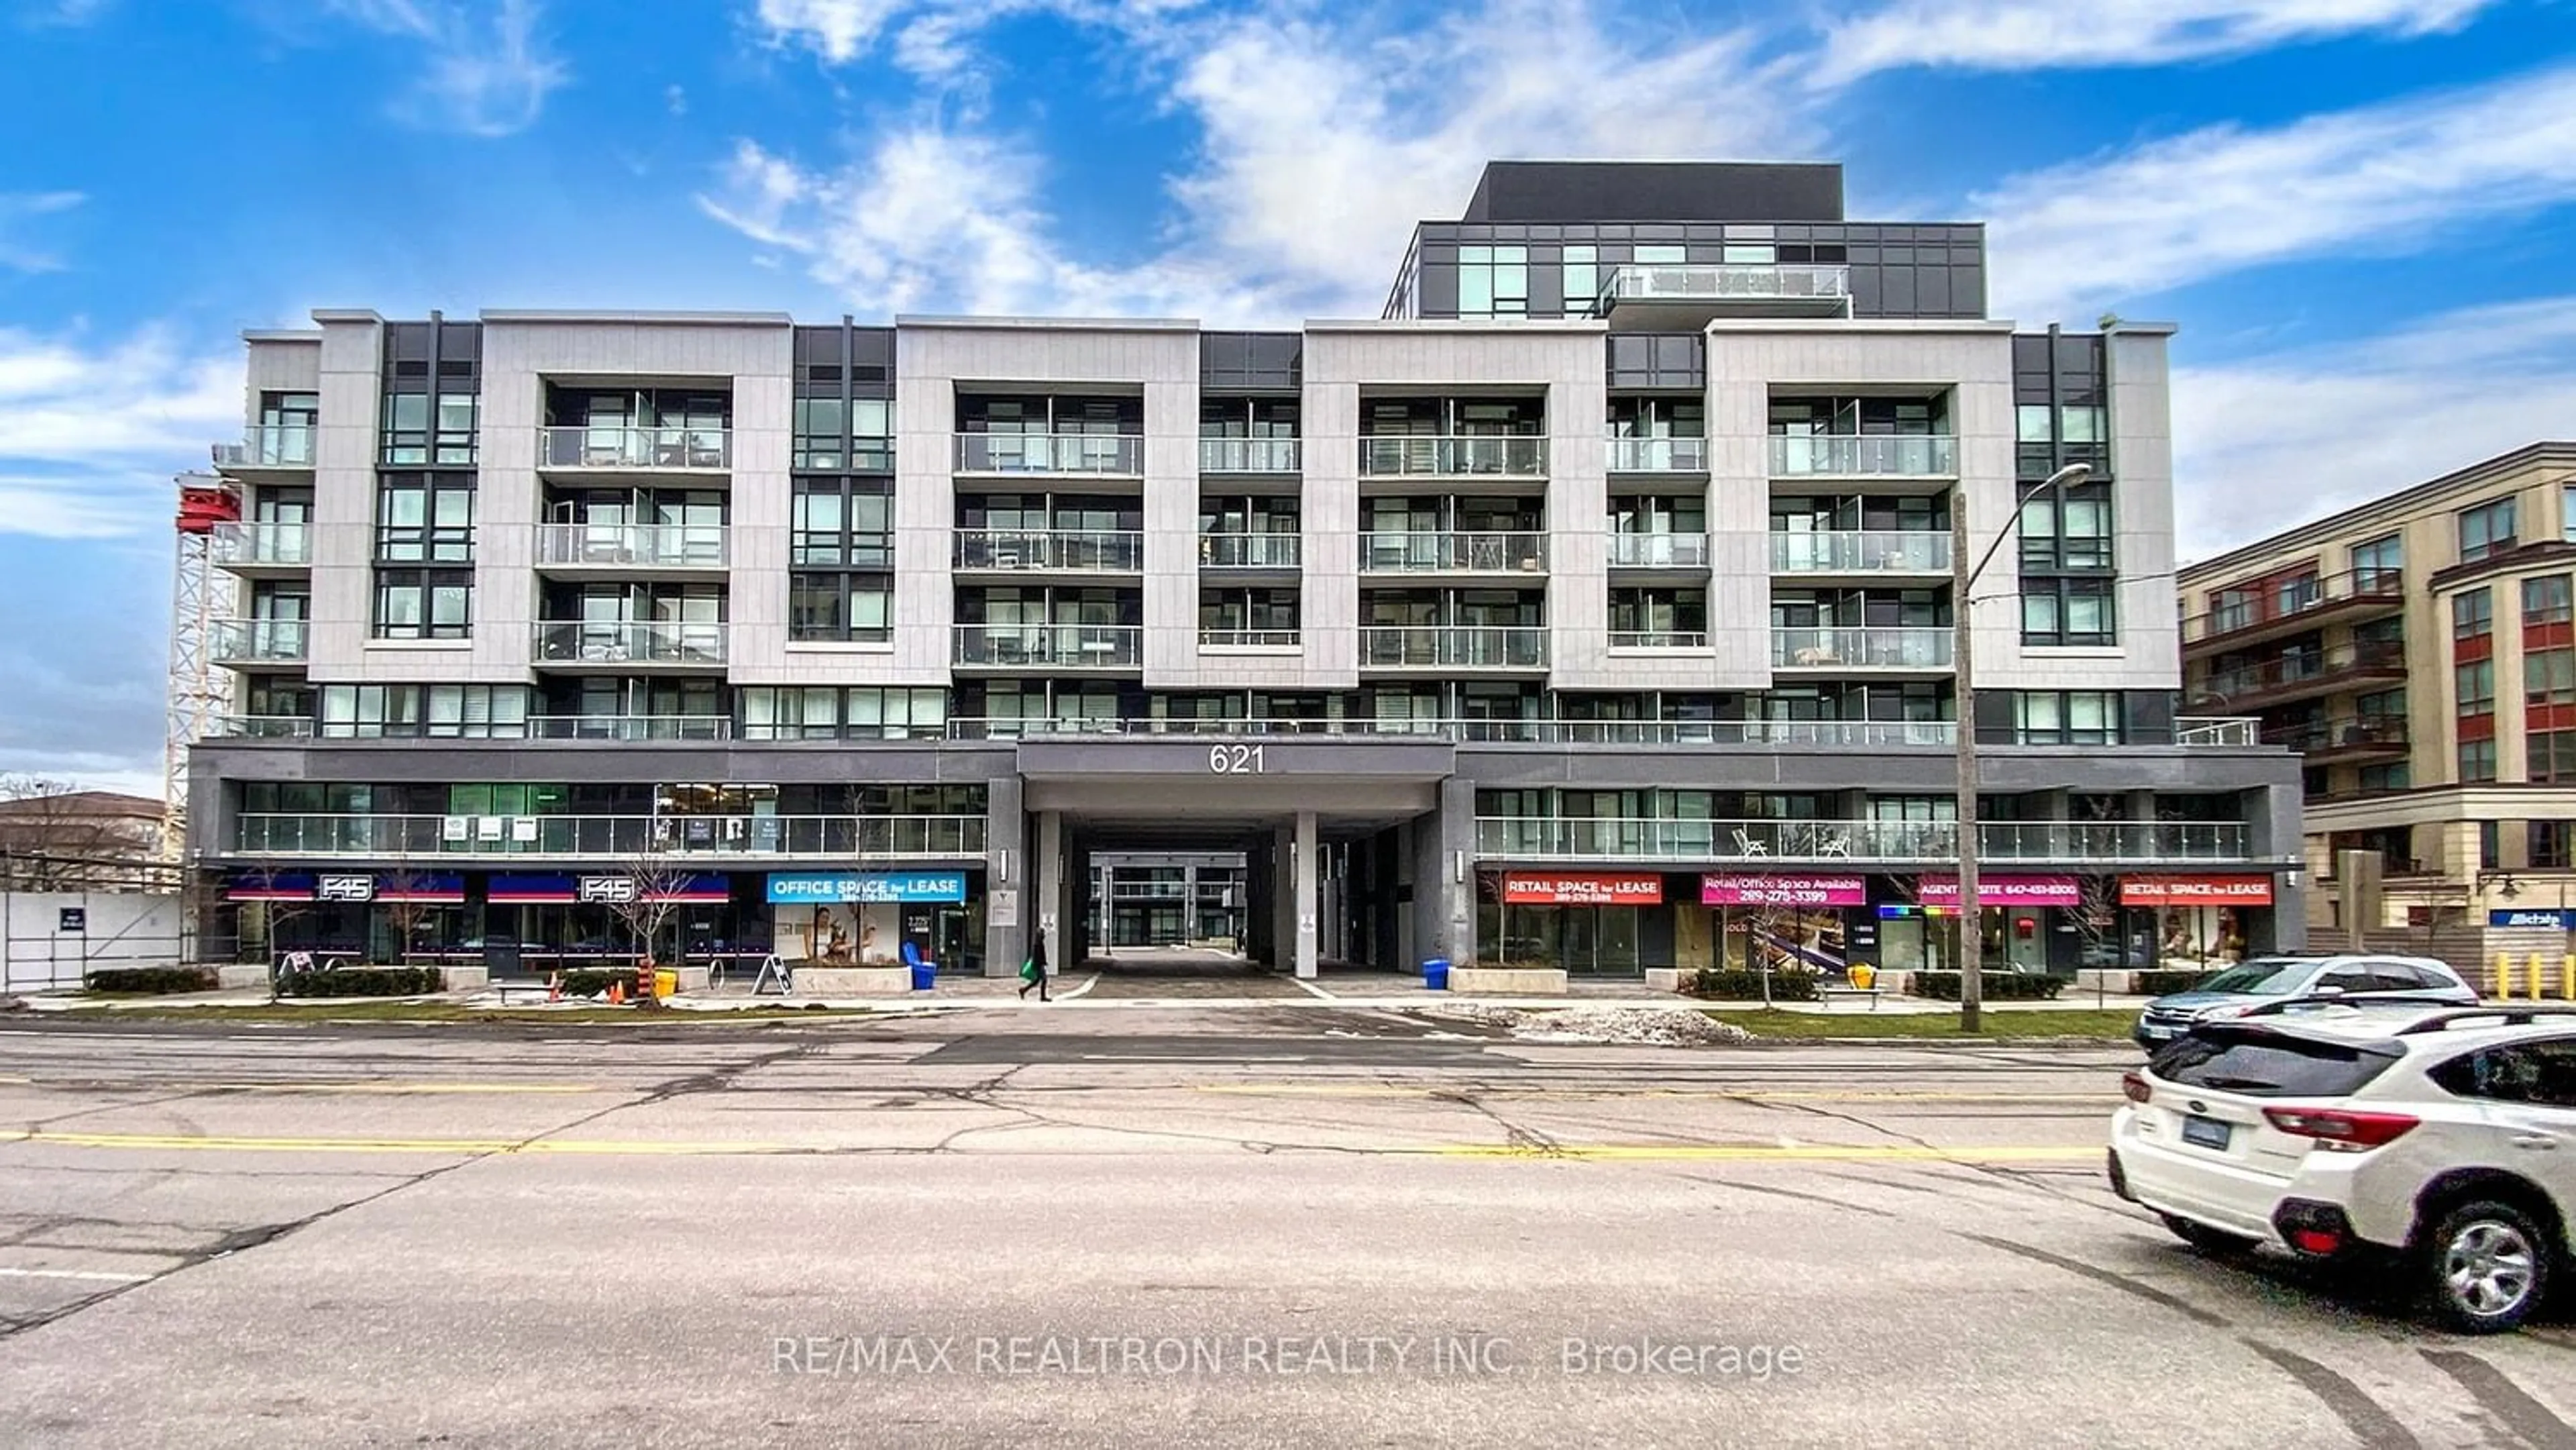 A pic from exterior of the house or condo for 621 Sheppard Ave #231, Toronto Ontario M2K 1B5